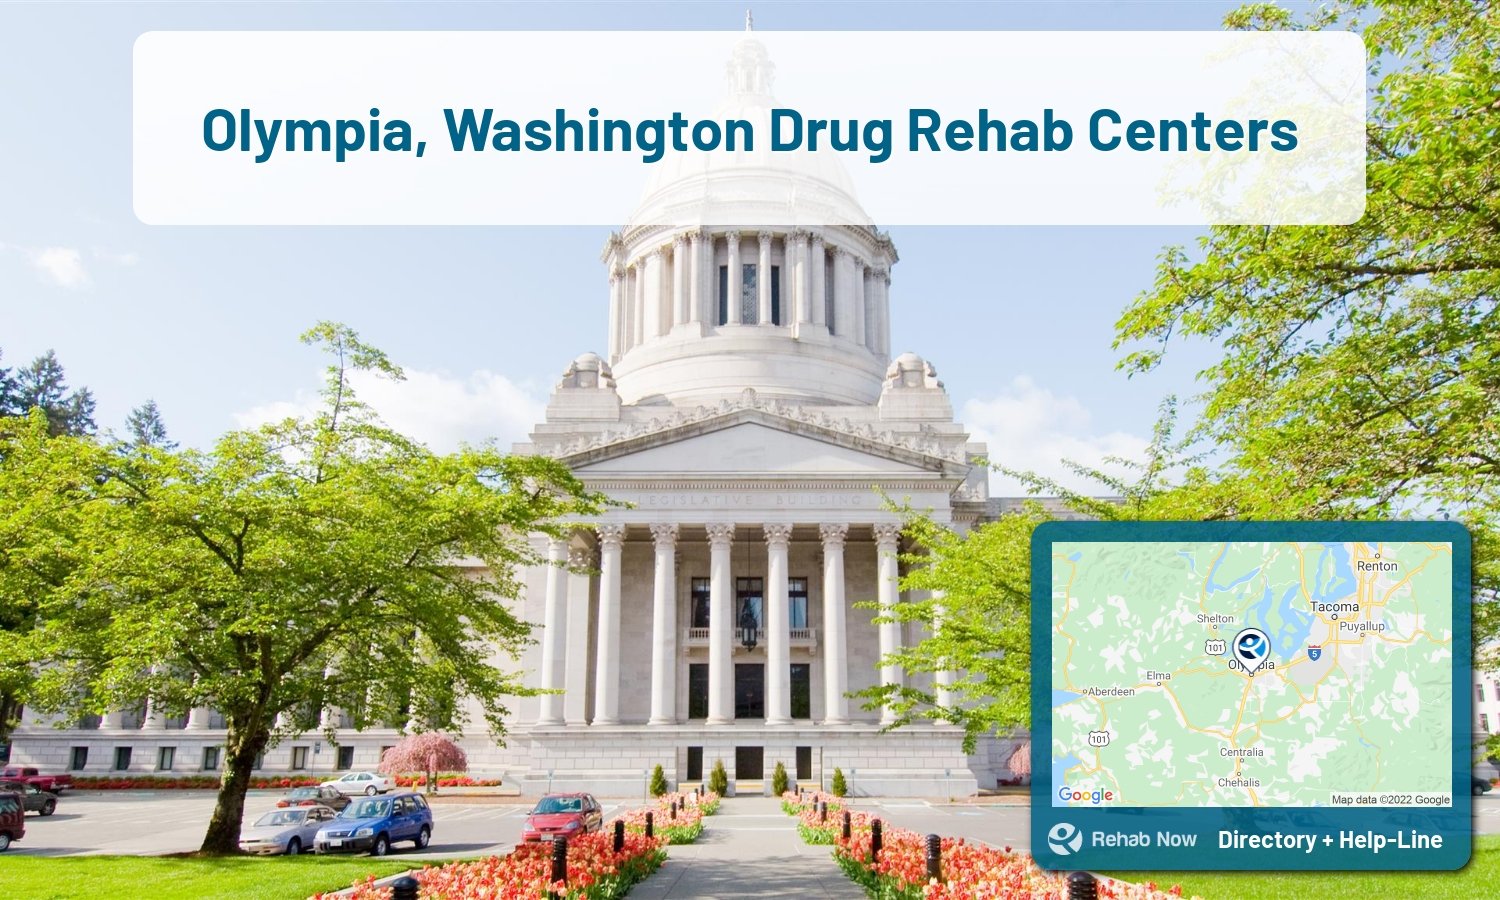 Olympia, WA Treatment Centers. Find drug rehab in Olympia, Washington, or detox and treatment programs. Get the right help now!